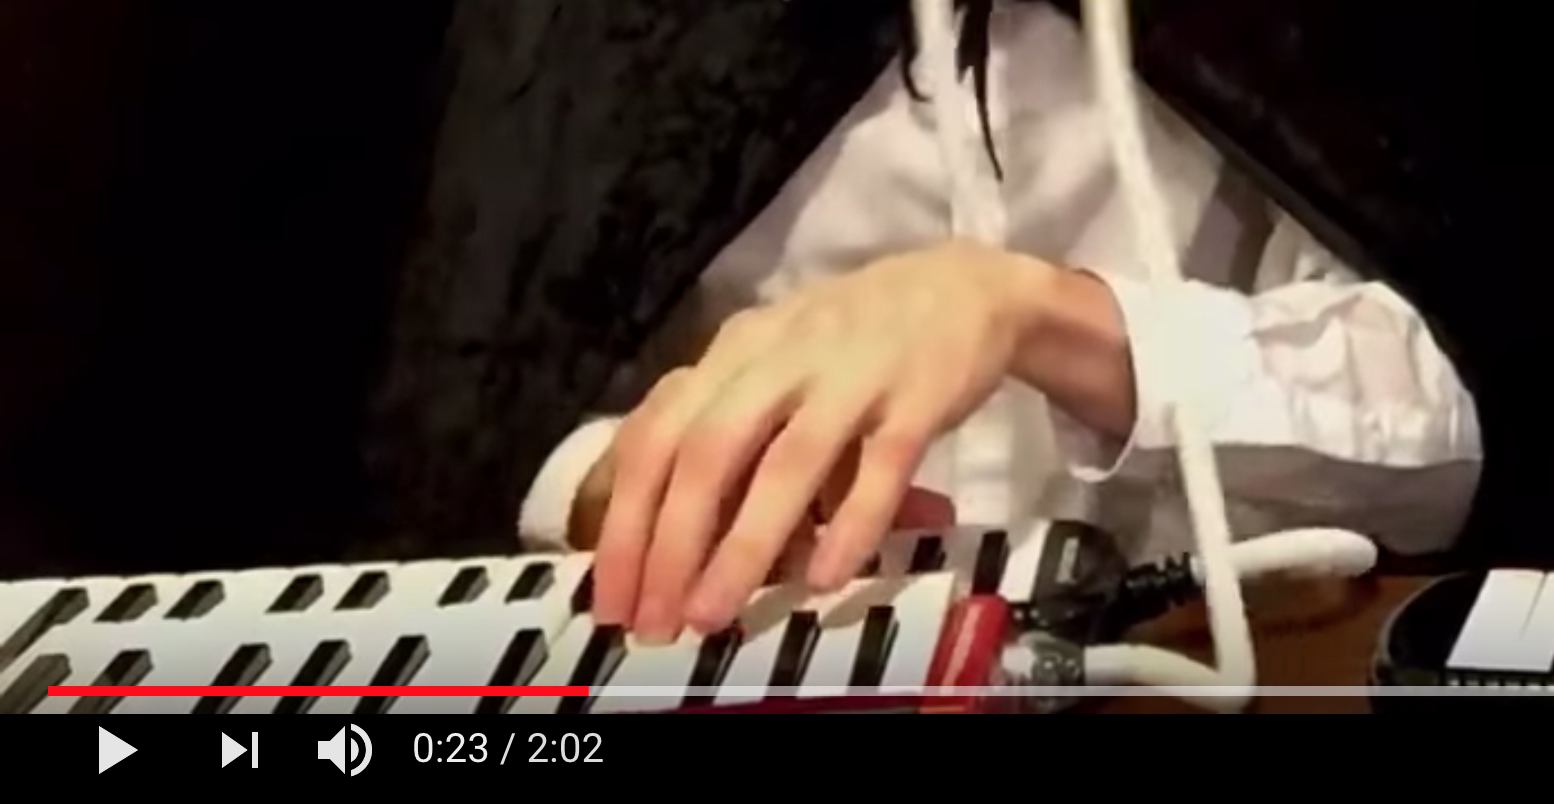 Screengrab of video mentioned in post, red melodica in foreground